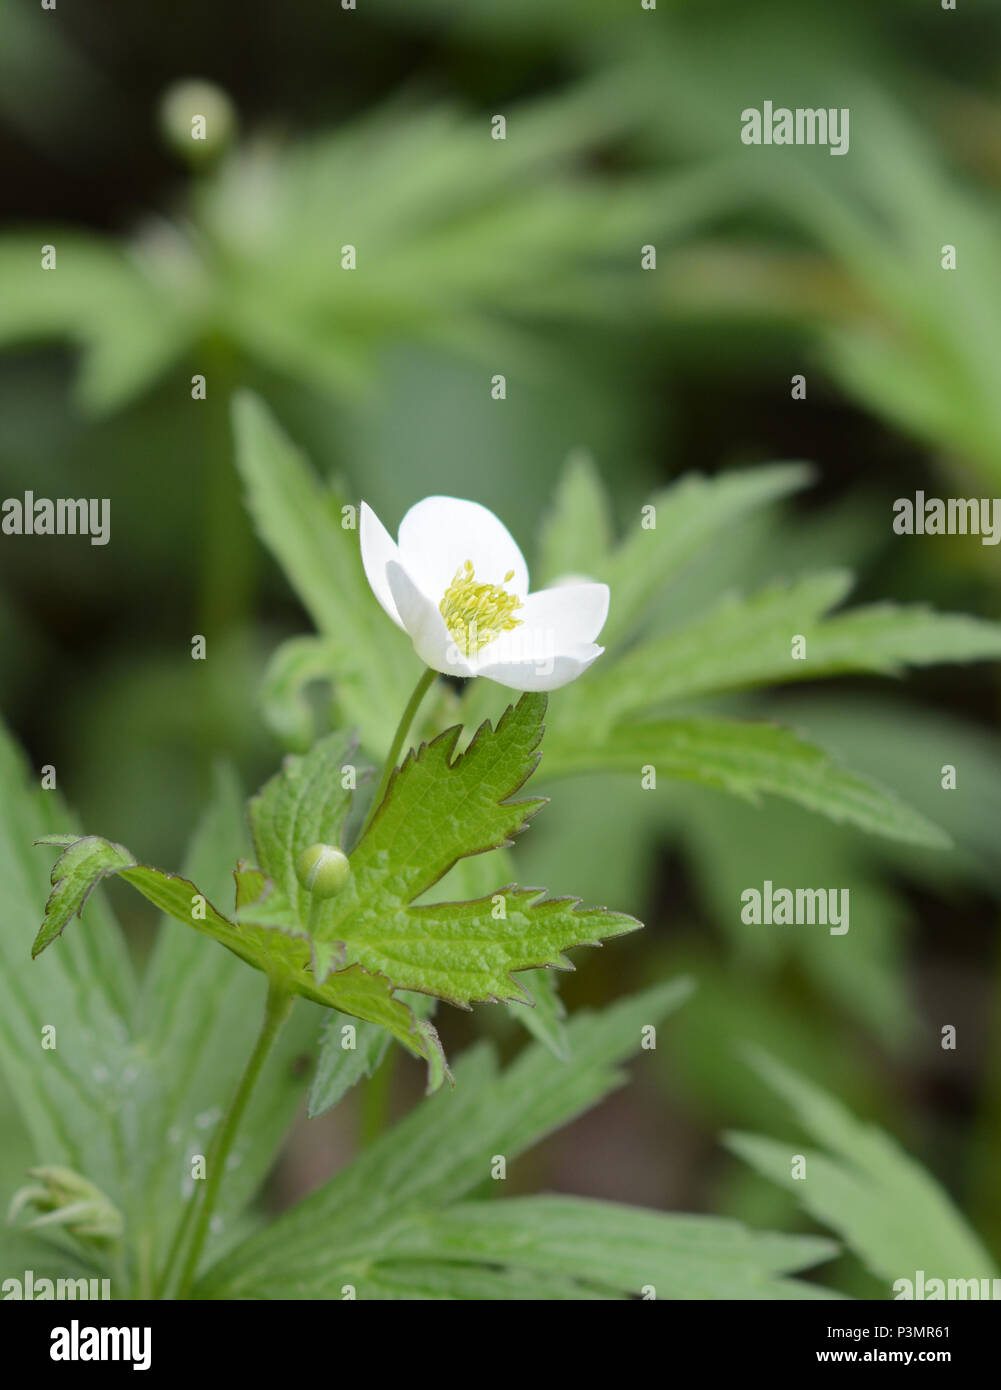 The white blooms of the Canadian Anemone (meadow anemone) stand out in shady, moist areas. It grows in upper North America. Stock Photo